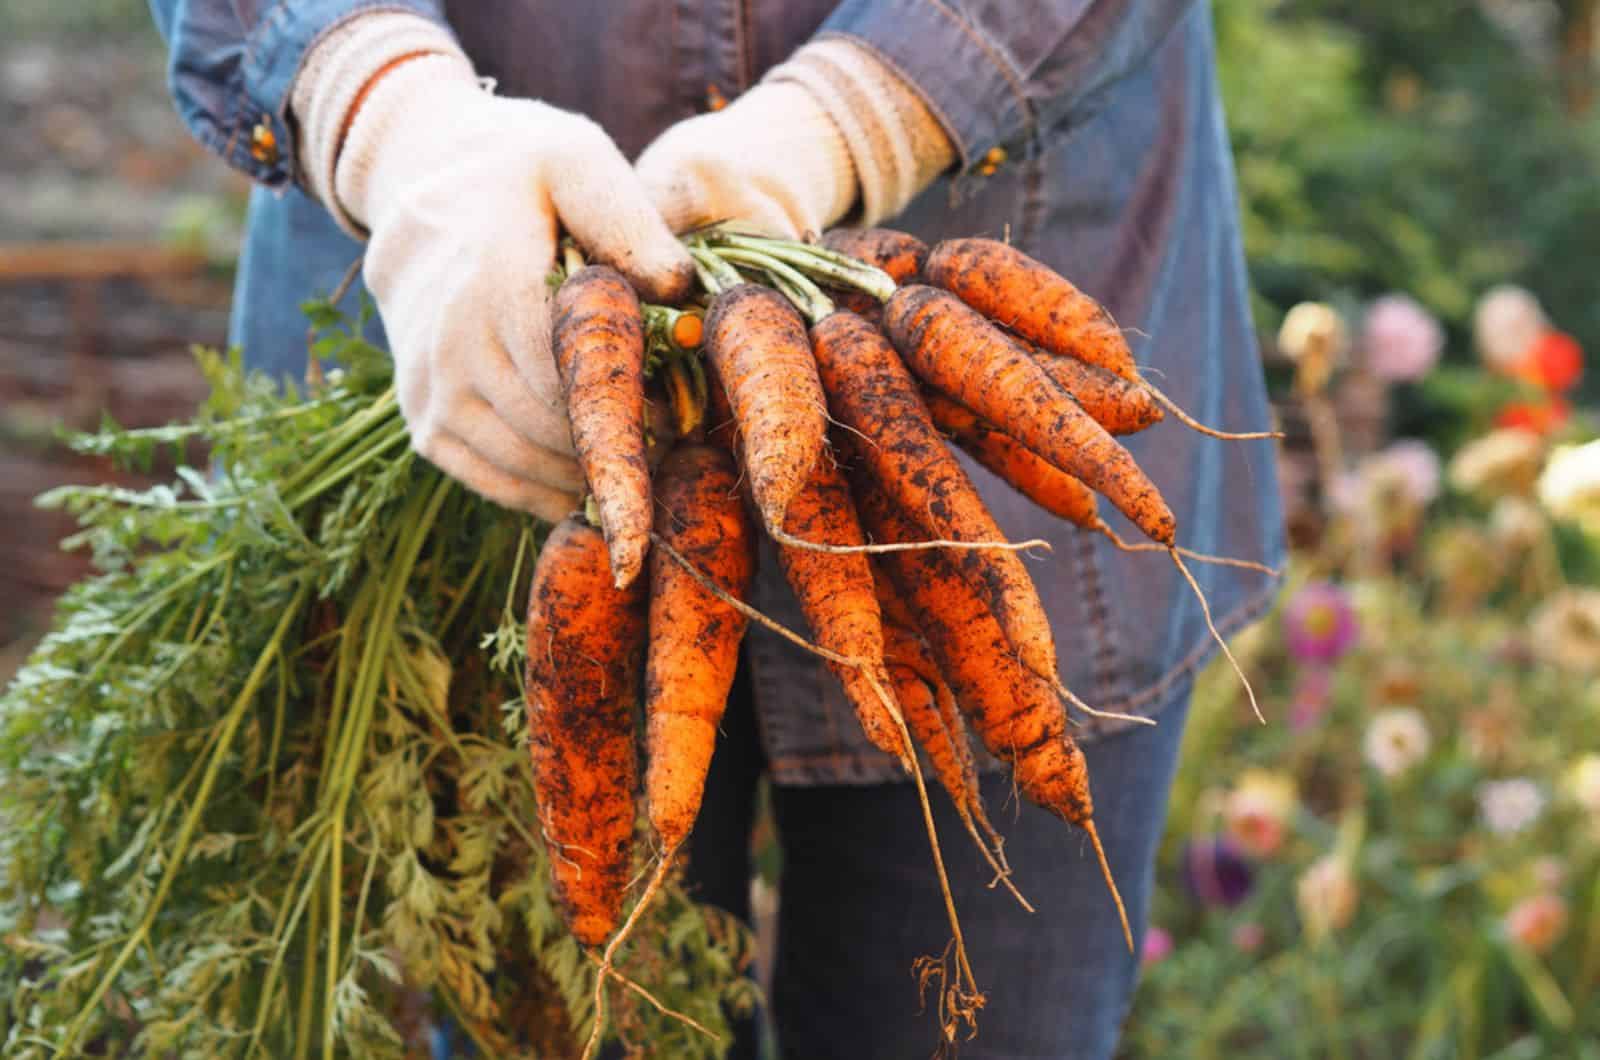 Women's hands in work gloves are holding a freshly dug carrot